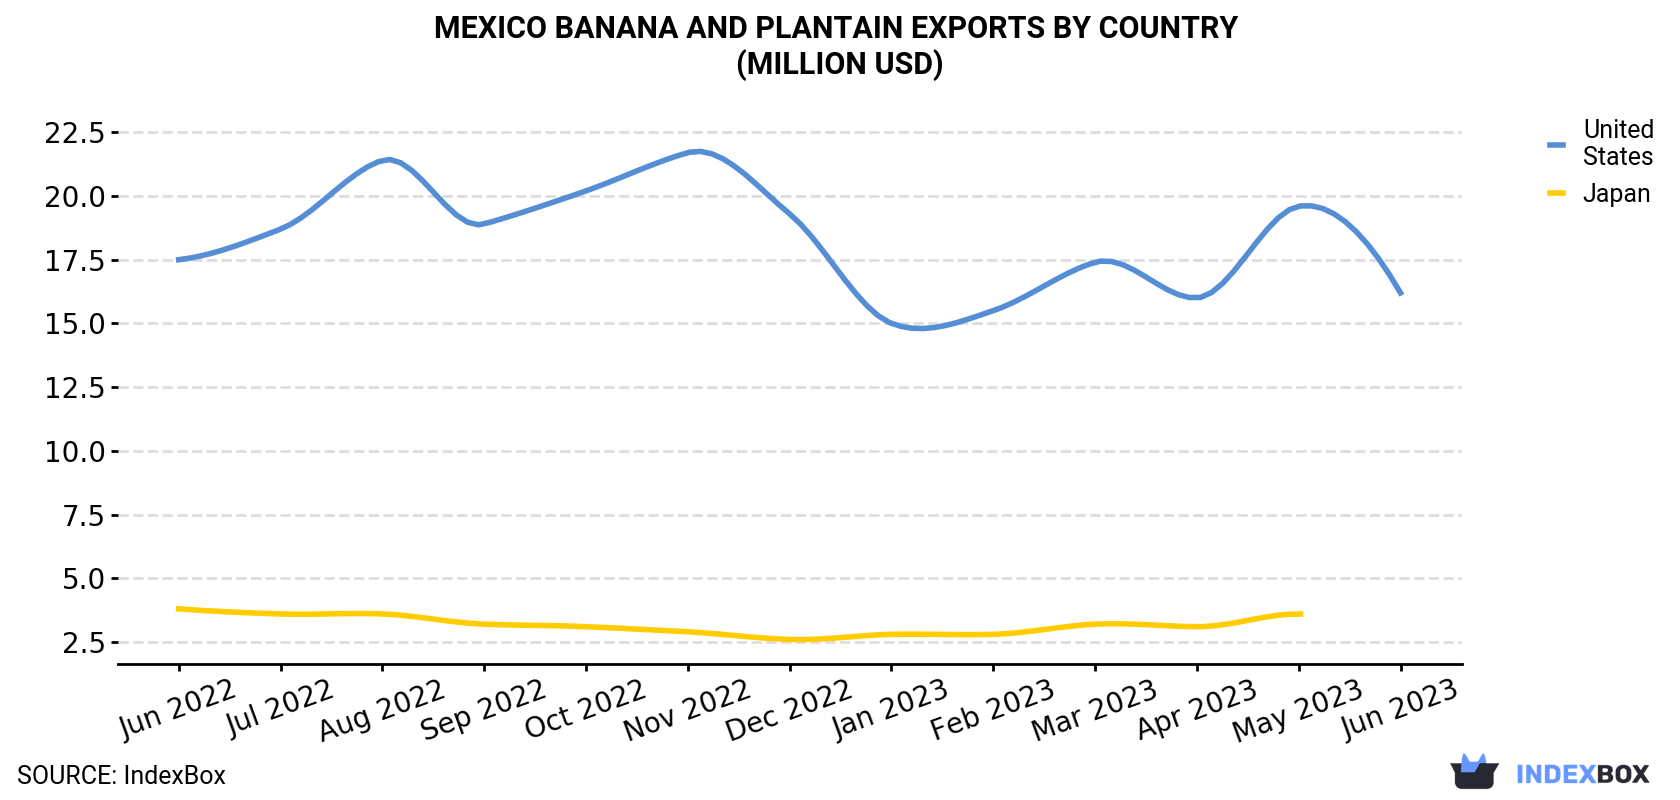 Mexico Banana and Plantain Exports By Country (Million USD)